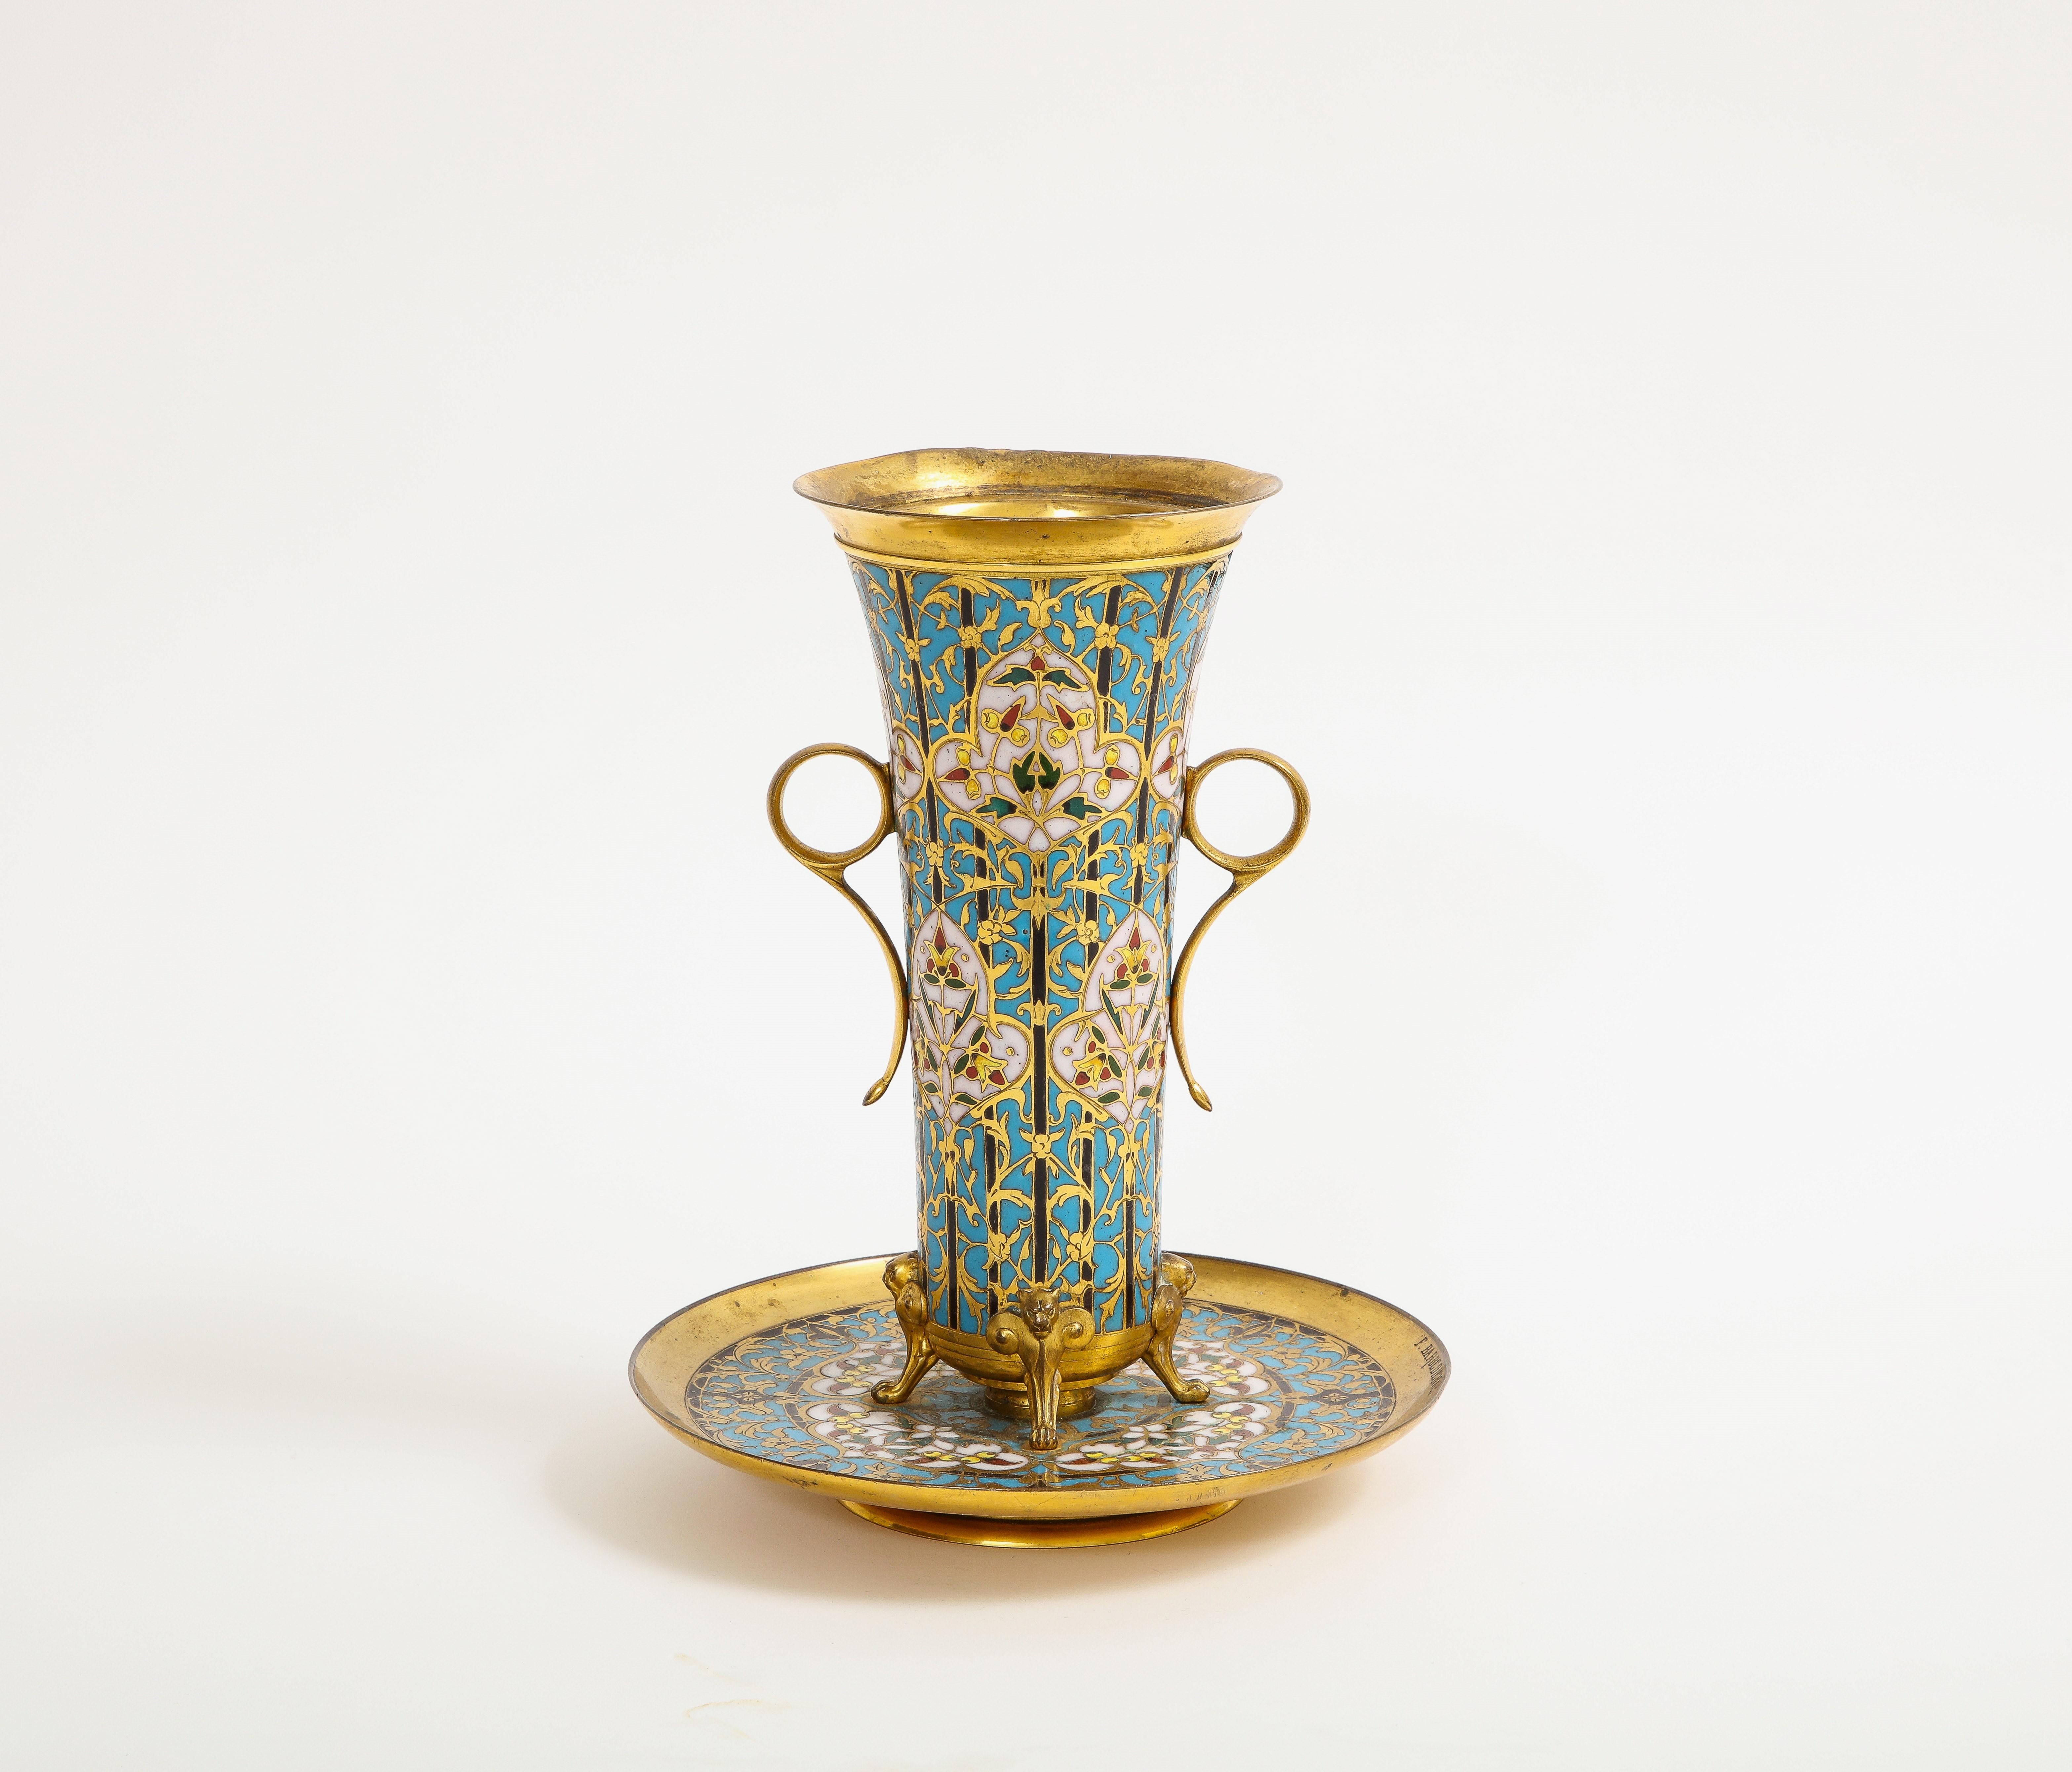 A Fantastic 19th century French Islamic/Orientalist Style Champleve Enamel Vase and Underplate, Signed F. Barbedienne. The wide-mouthed vase terminates down a narrowing body and is mounted on four ormolu lions-paw feet. The body of the vase is